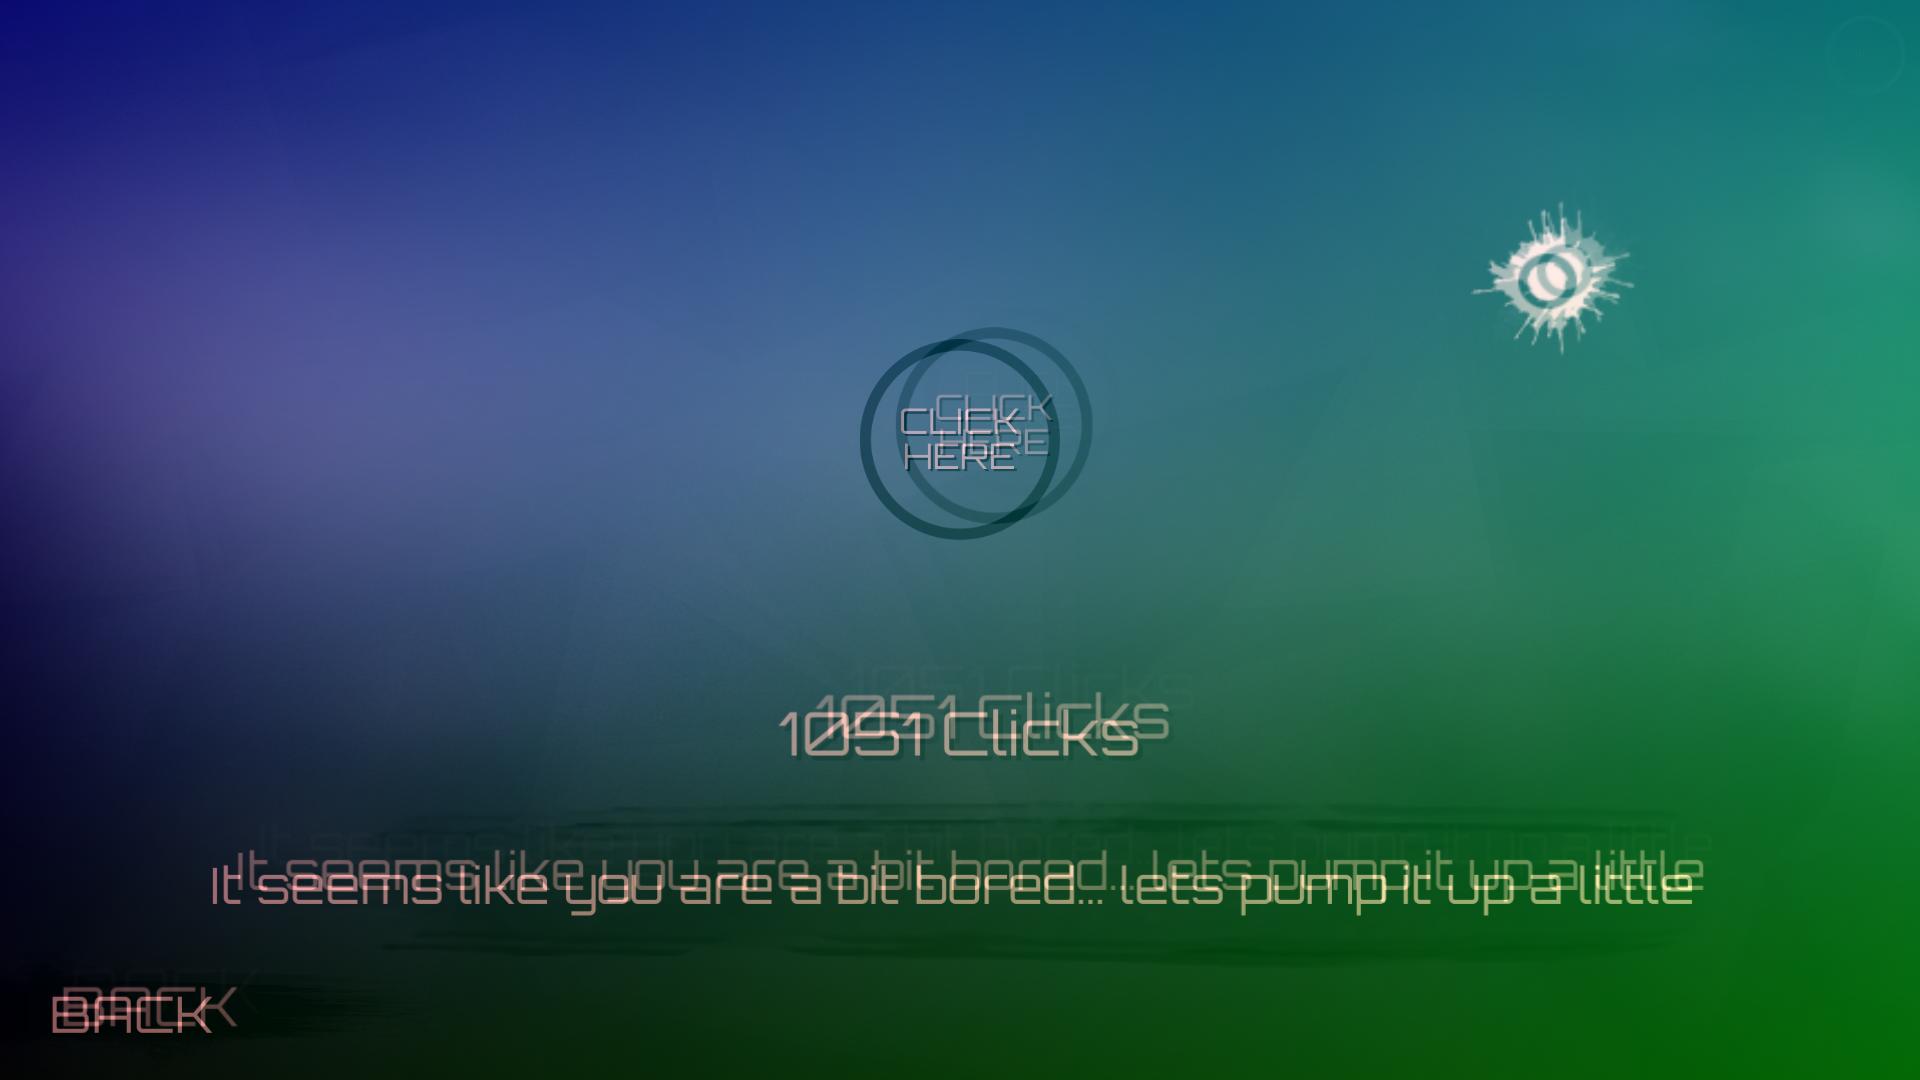 CLICKER ACHIEVEMENTS - THE IMPOSSIBLE CHALLENGE screenshot